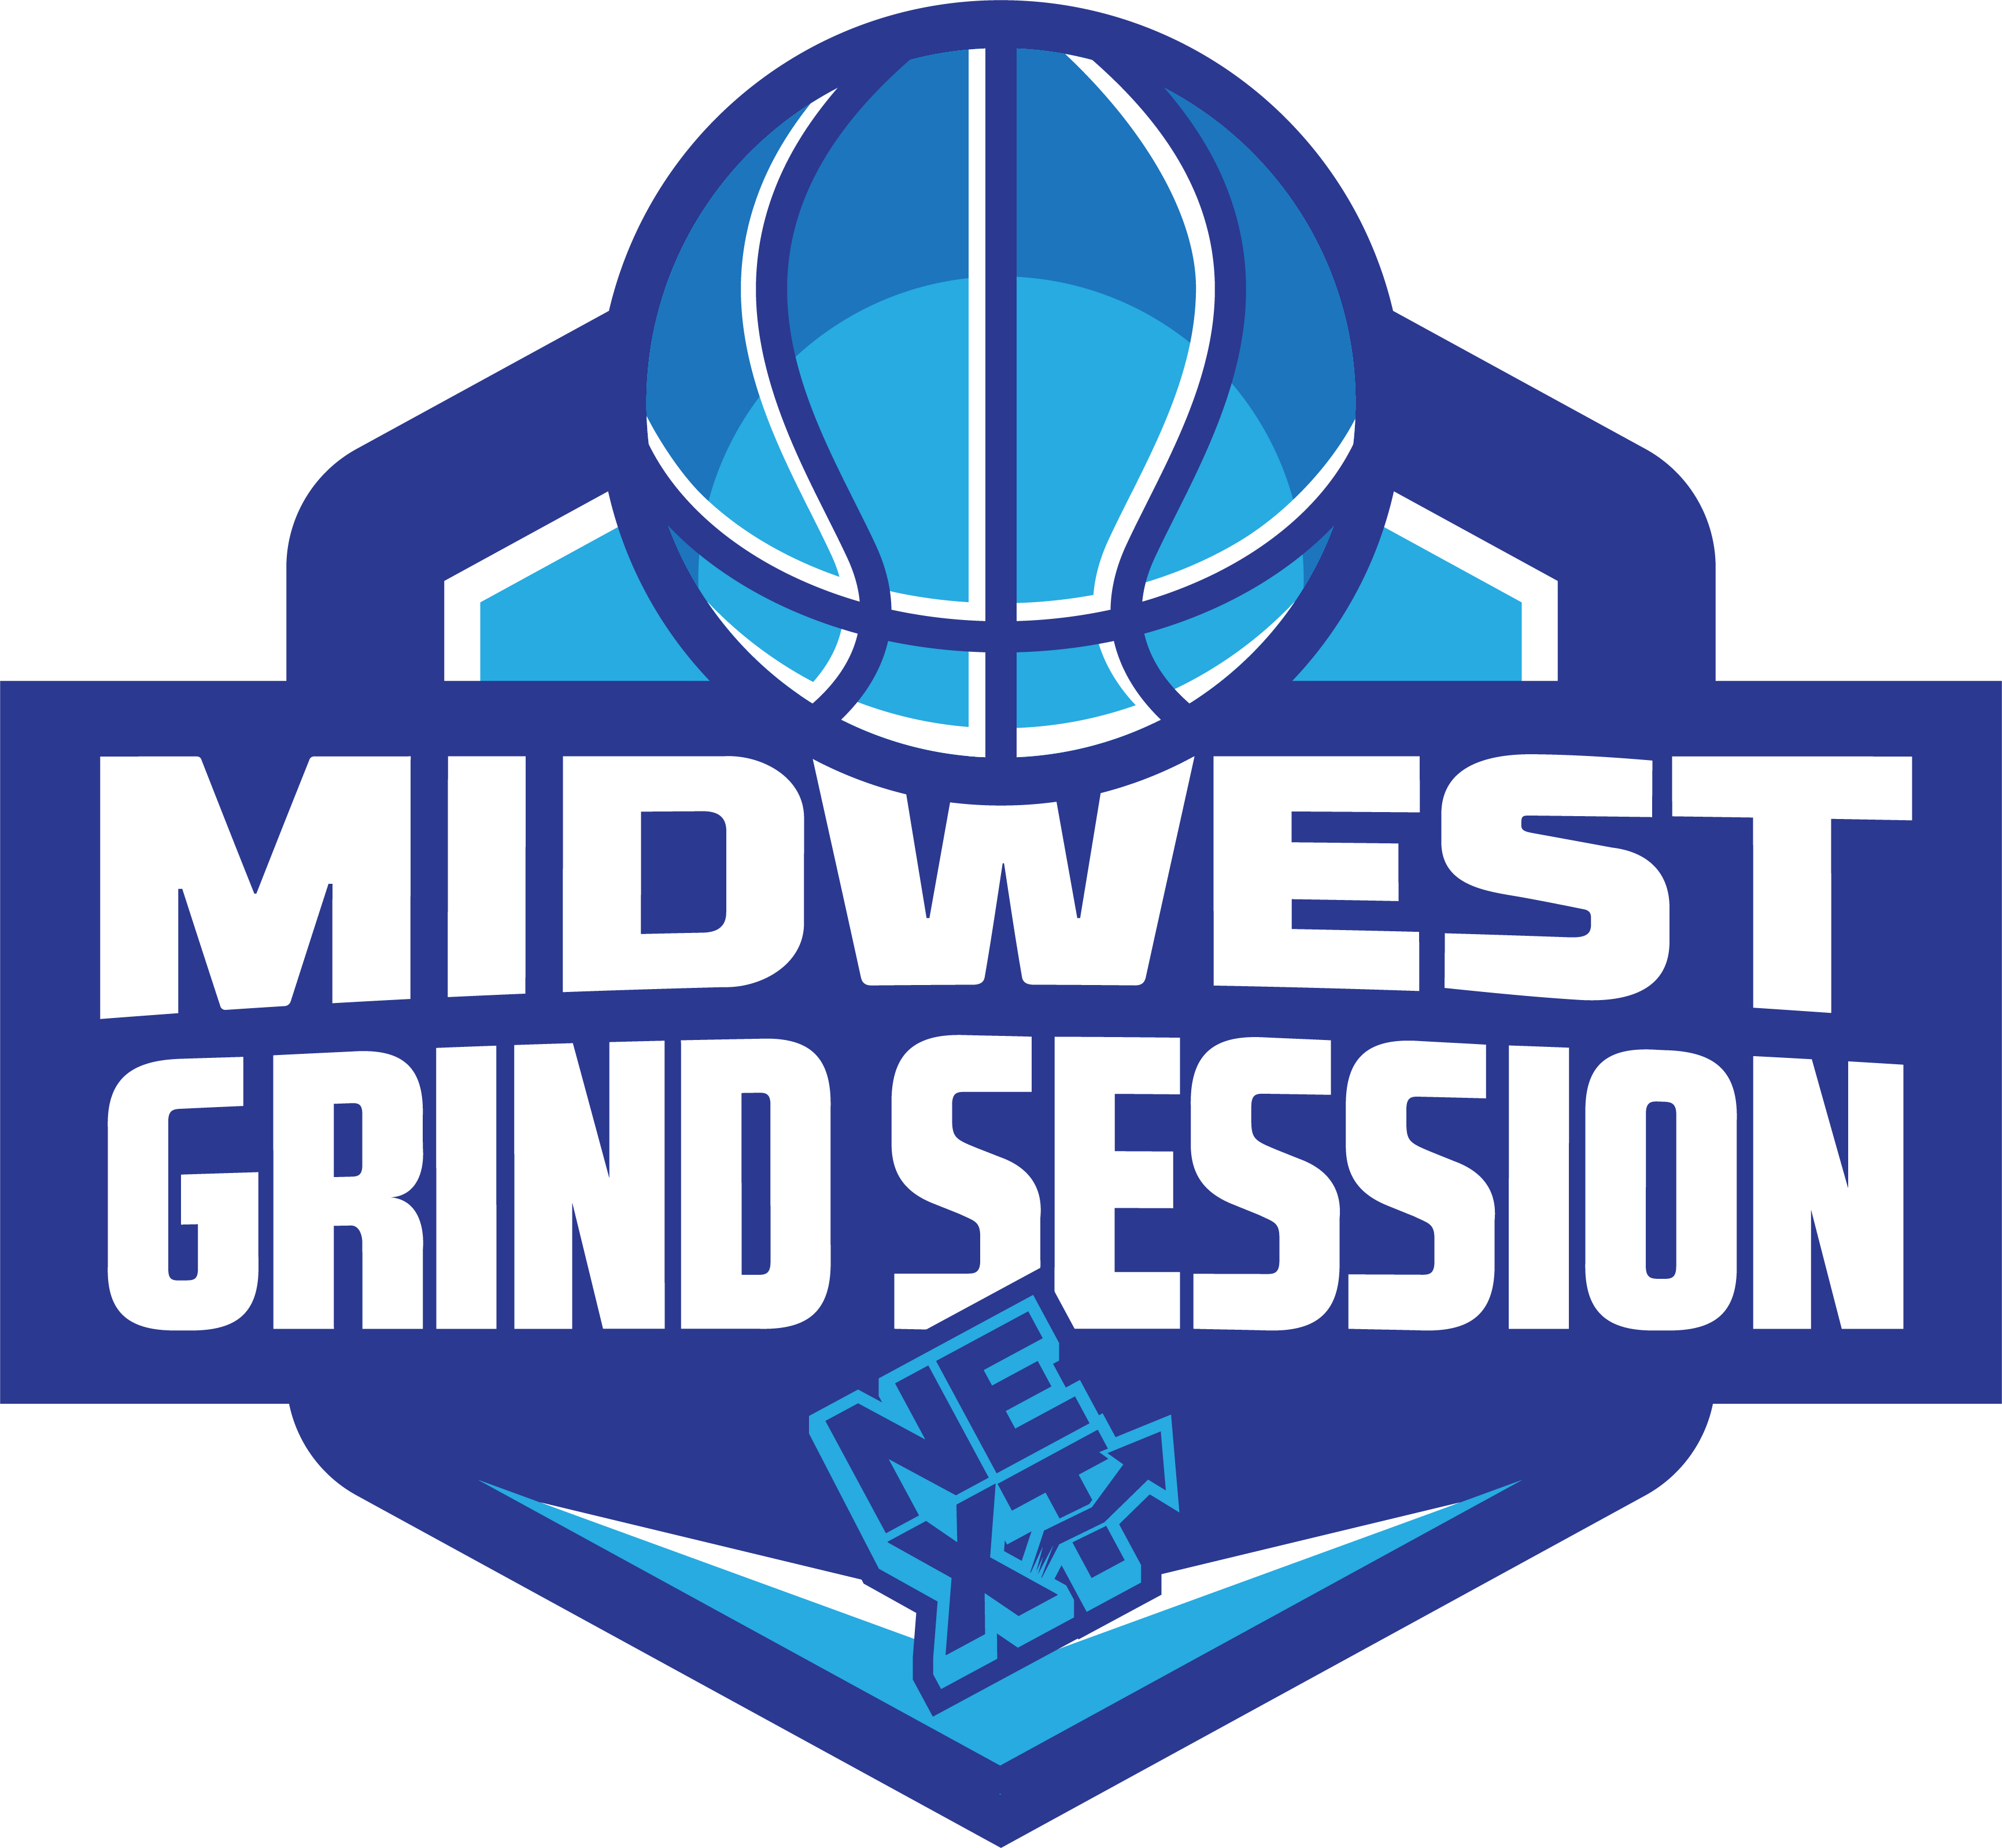 Midwest Grind Session